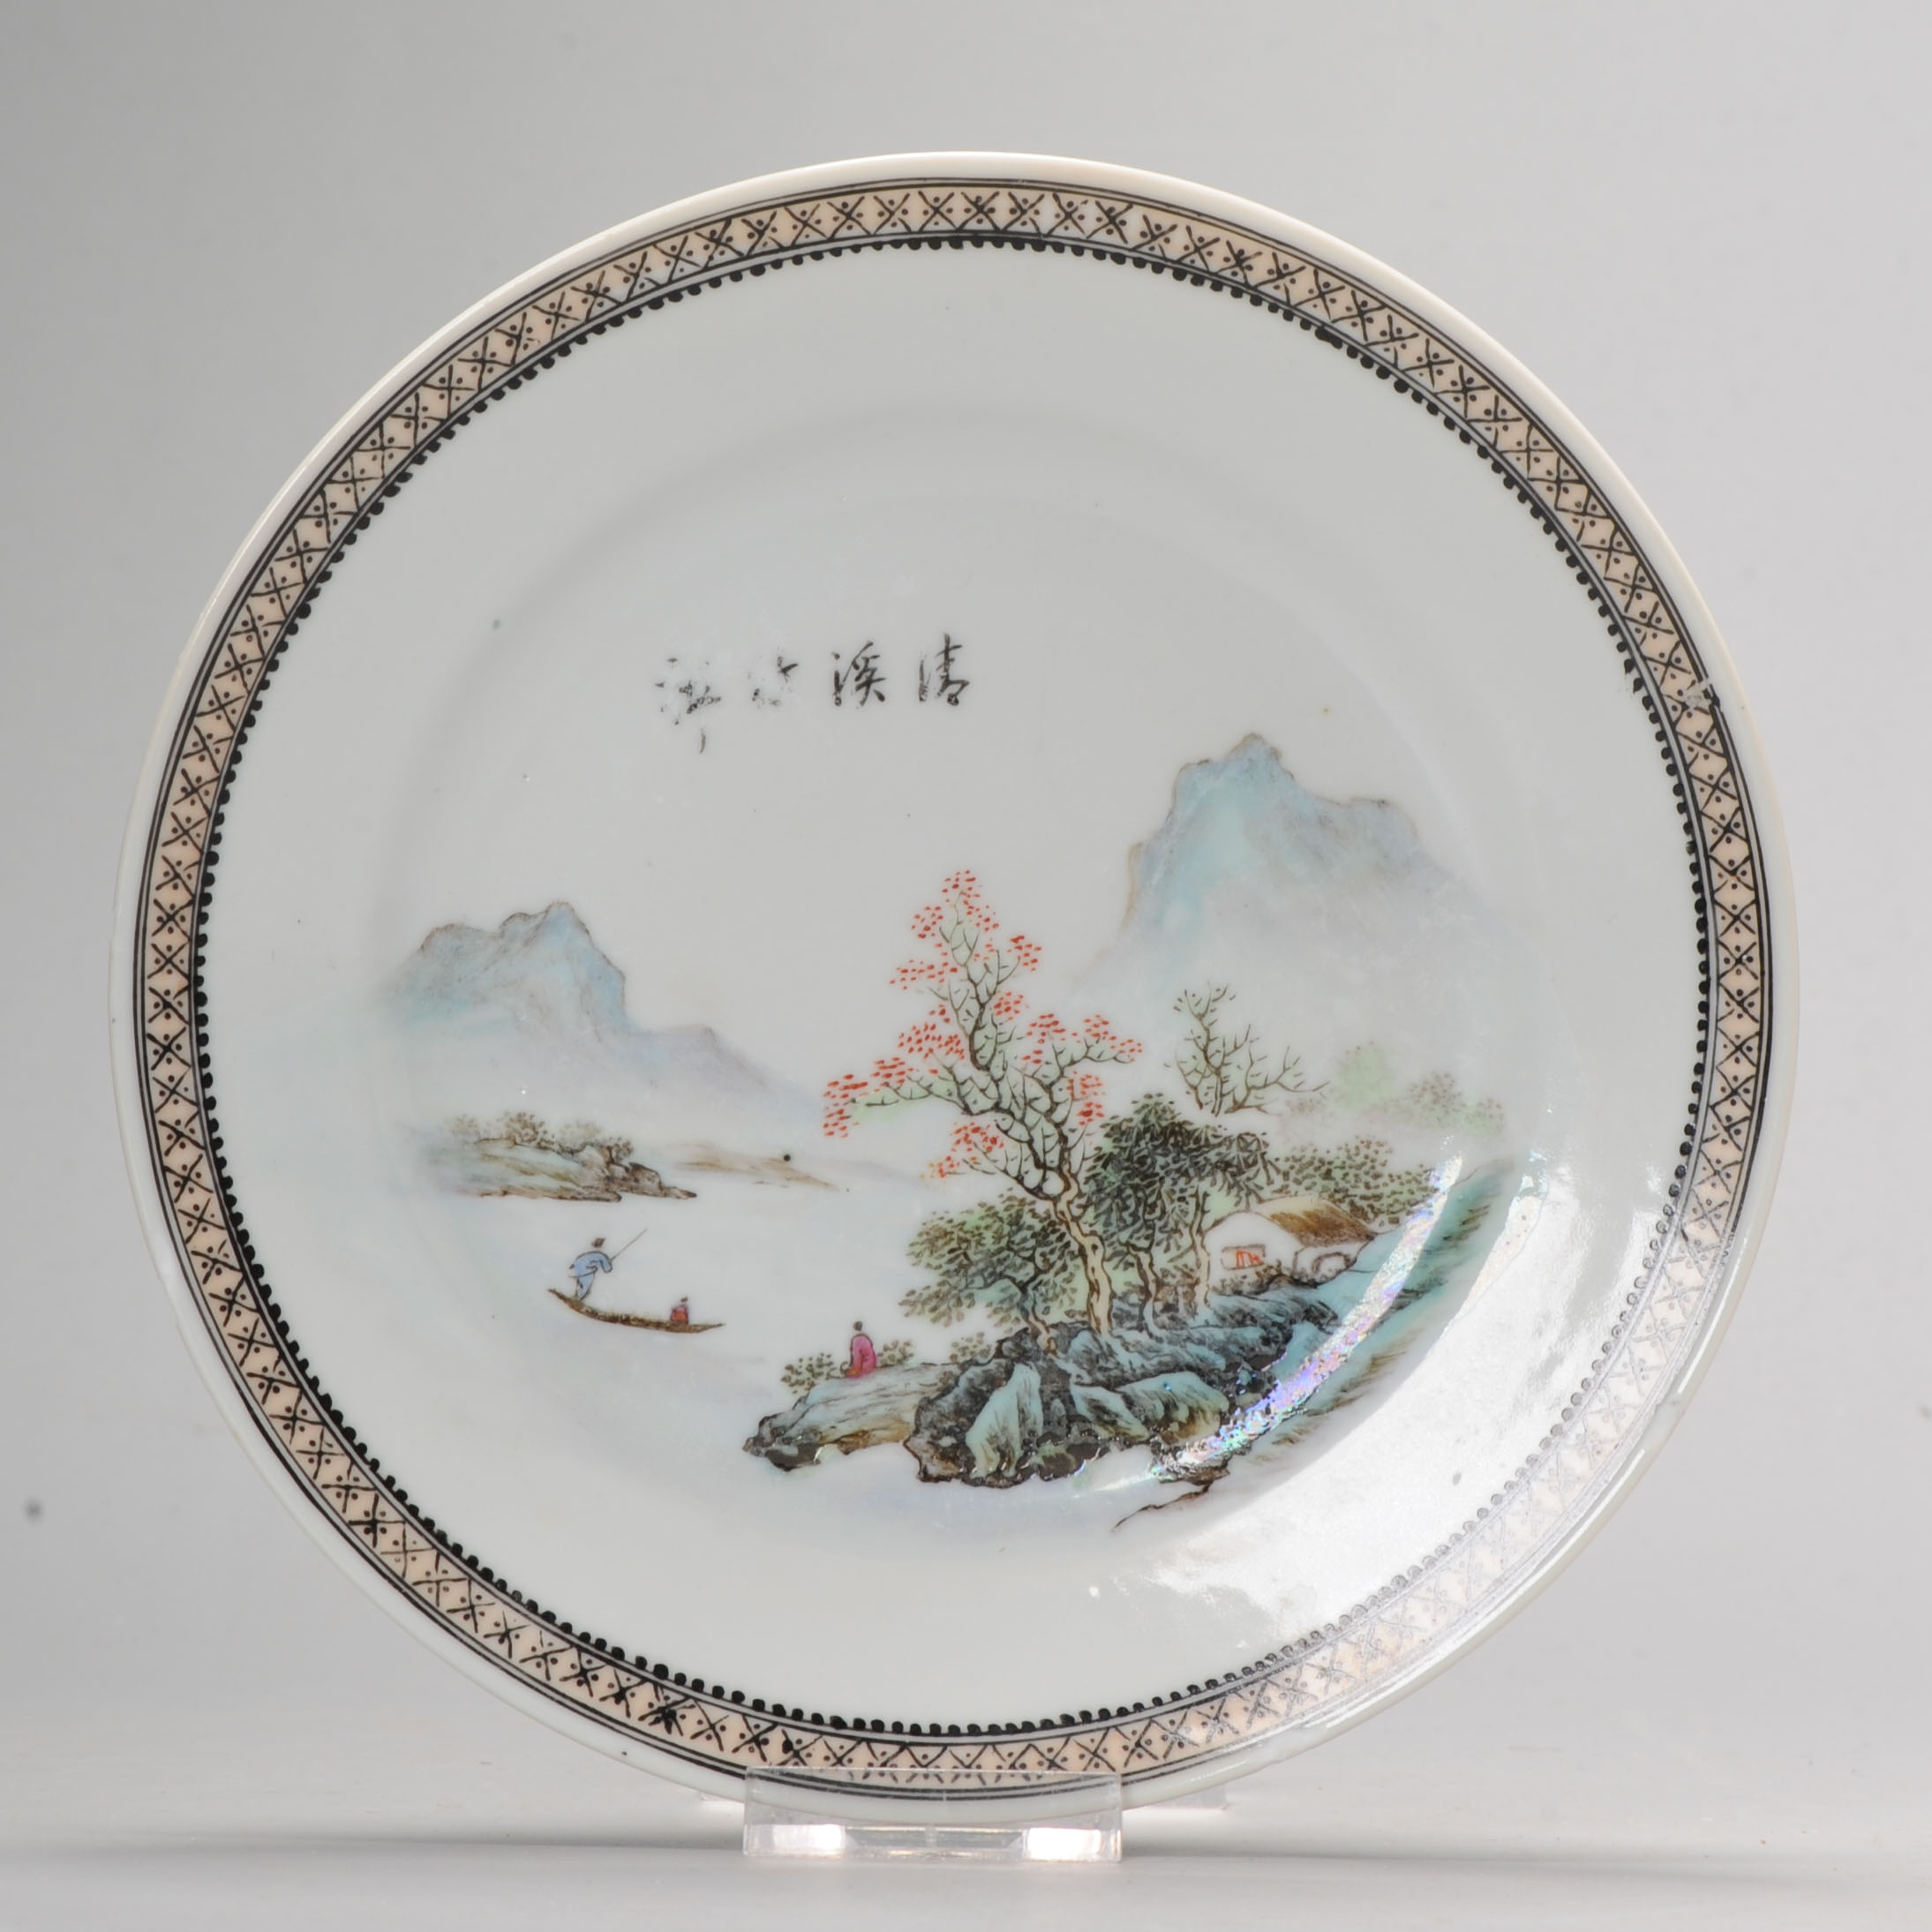 1091 Lovely ProC 1950’s period dish, marked at the base. A dreamy landscape